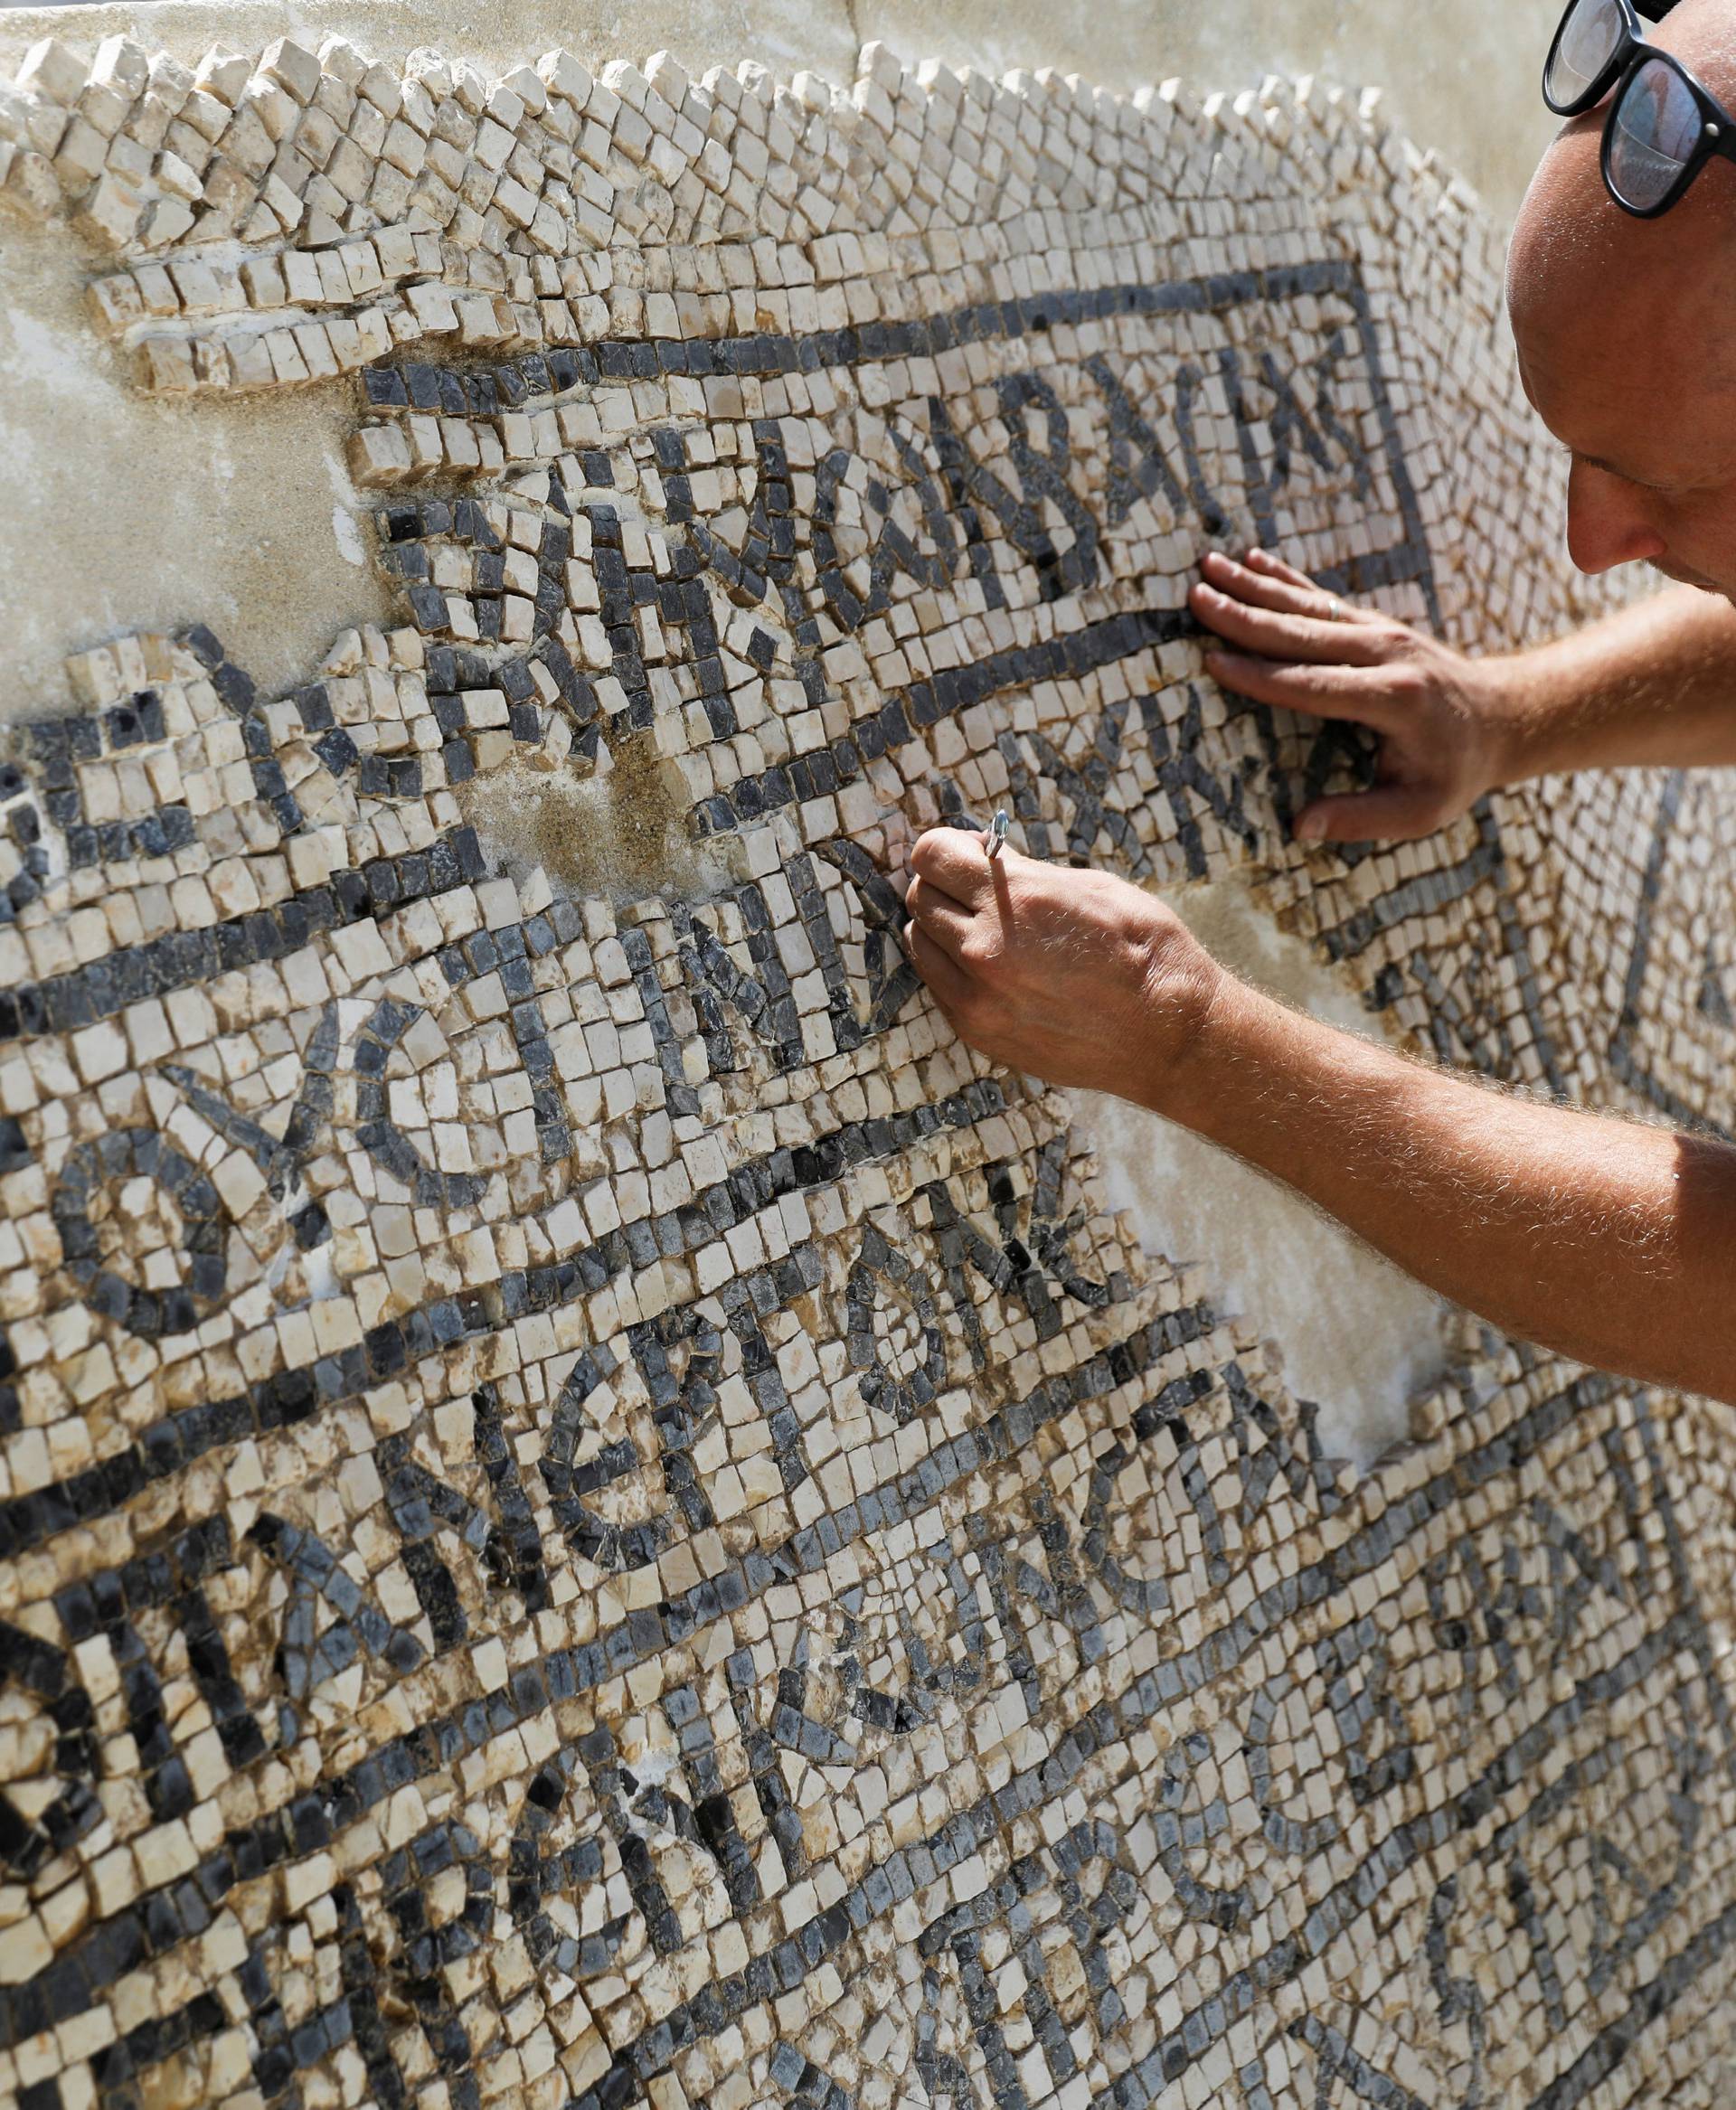 A conservationist works on a 1500-year-old mosaic floor bearing a Greek writing, discovered near Damascus Gate in Jerusalem's Old City, as it is displayed at the Rockefeller Museum in Jerusalem